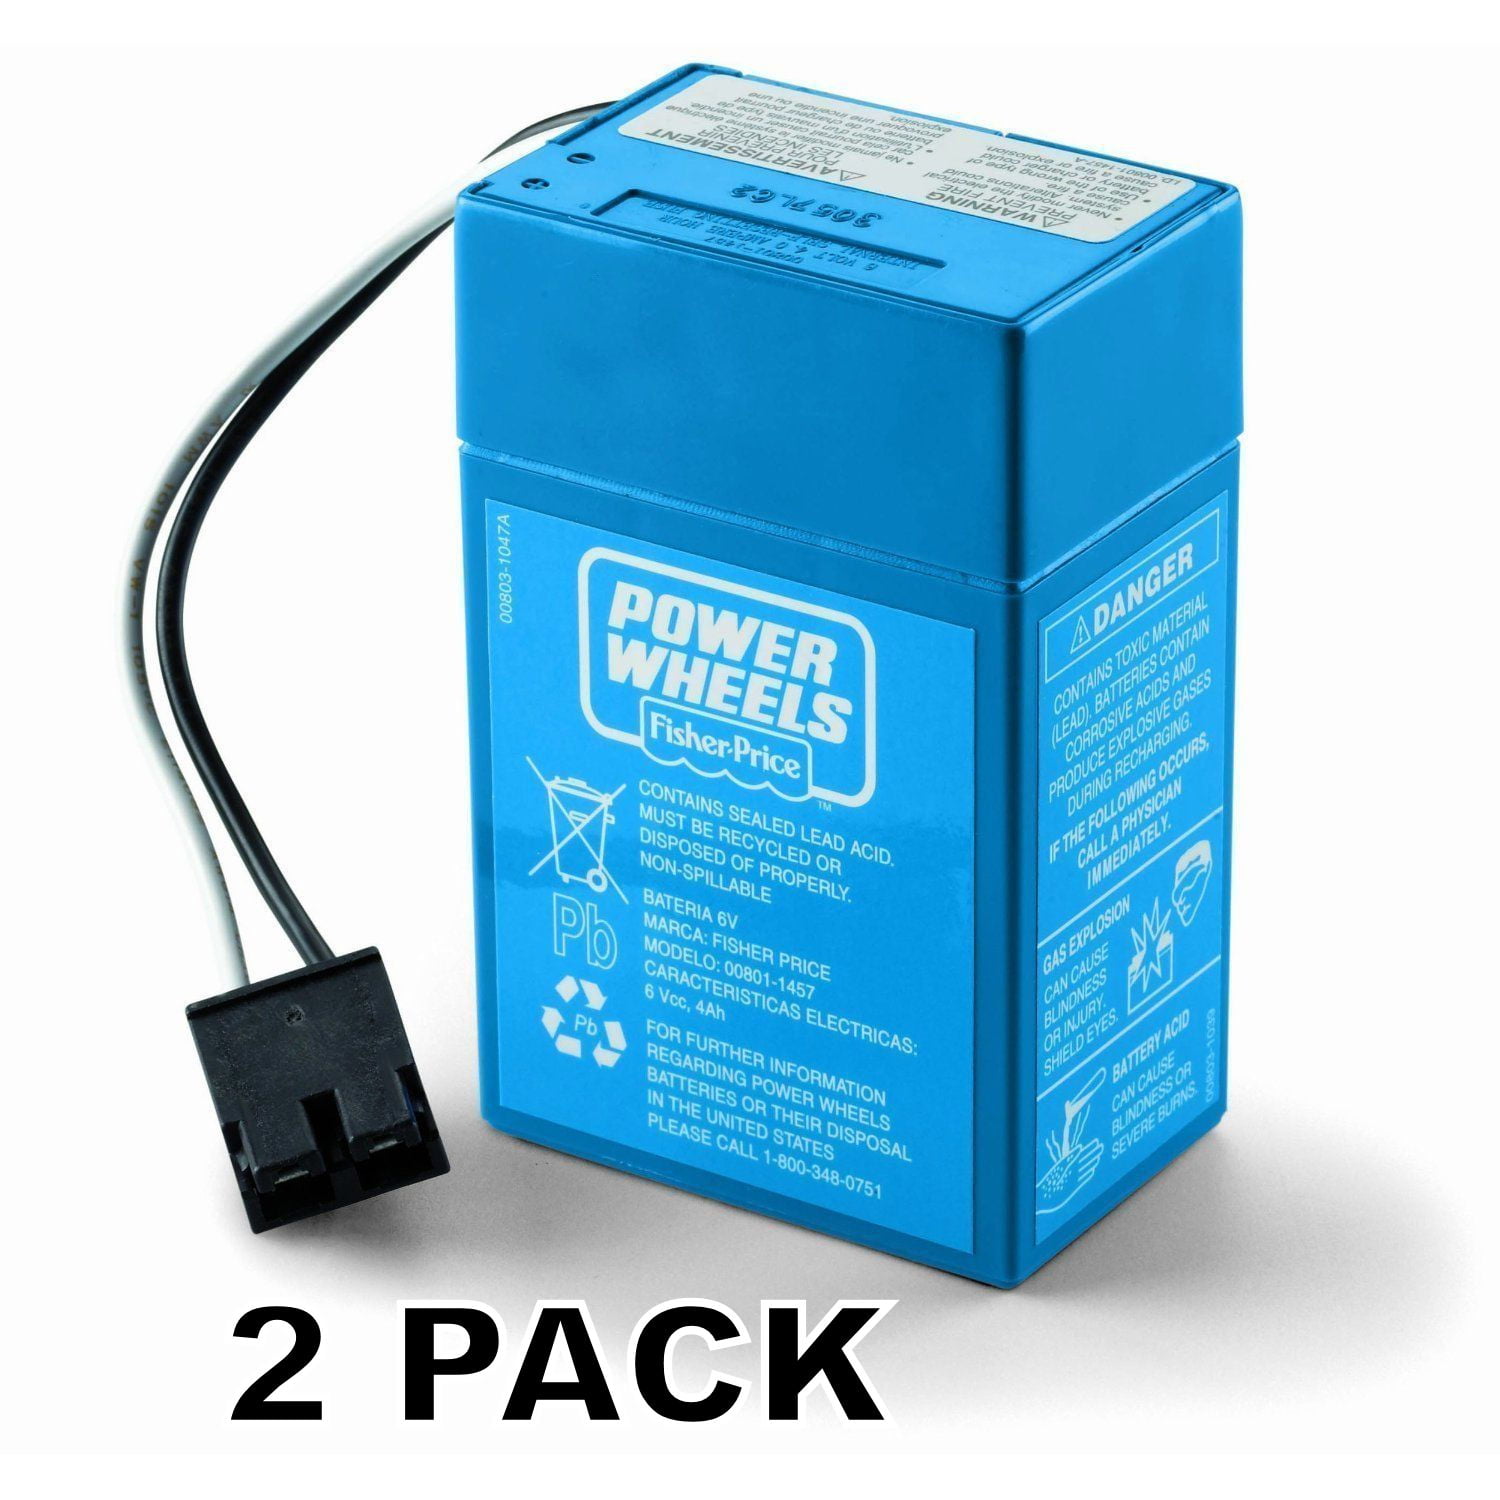 Power Wheels 74777 12V Rechargeable Battery for sale online 